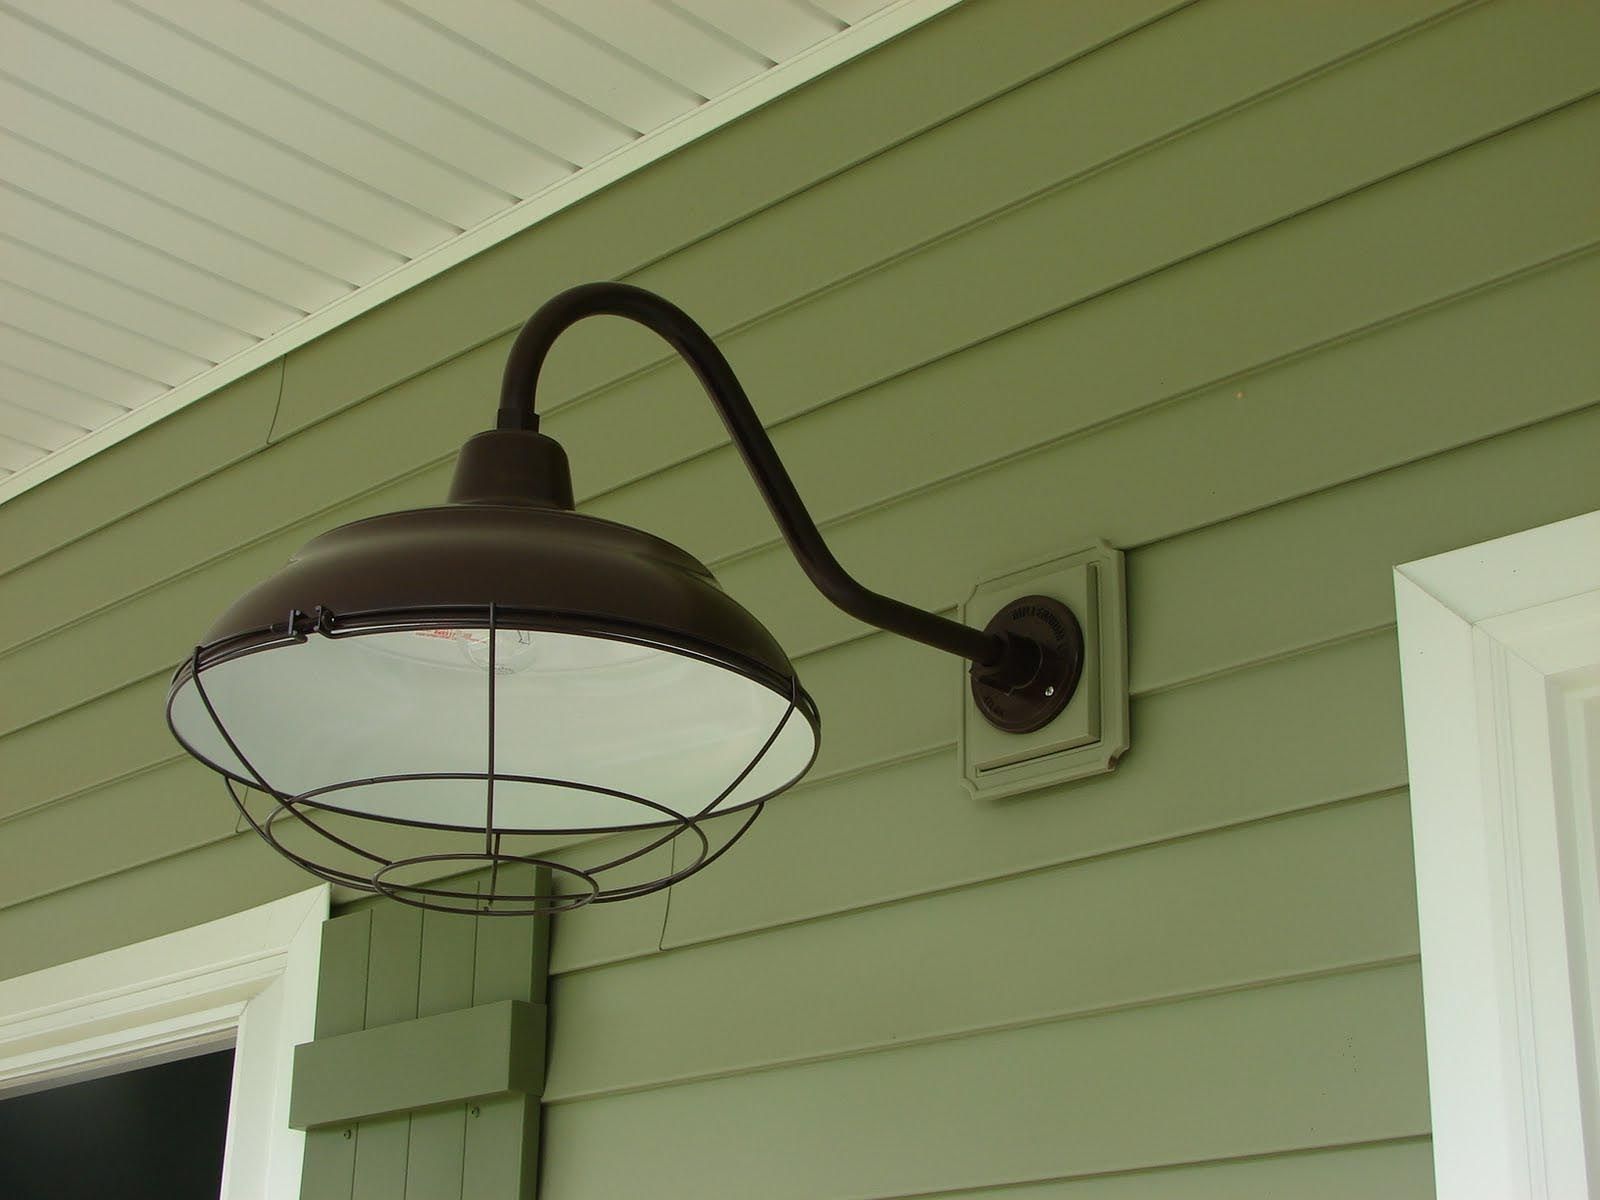 Outside Barn Lighting Fixtures | Light Fixtures Design Ideas Within Outdoor Barn Ceiling Lights (View 10 of 15)